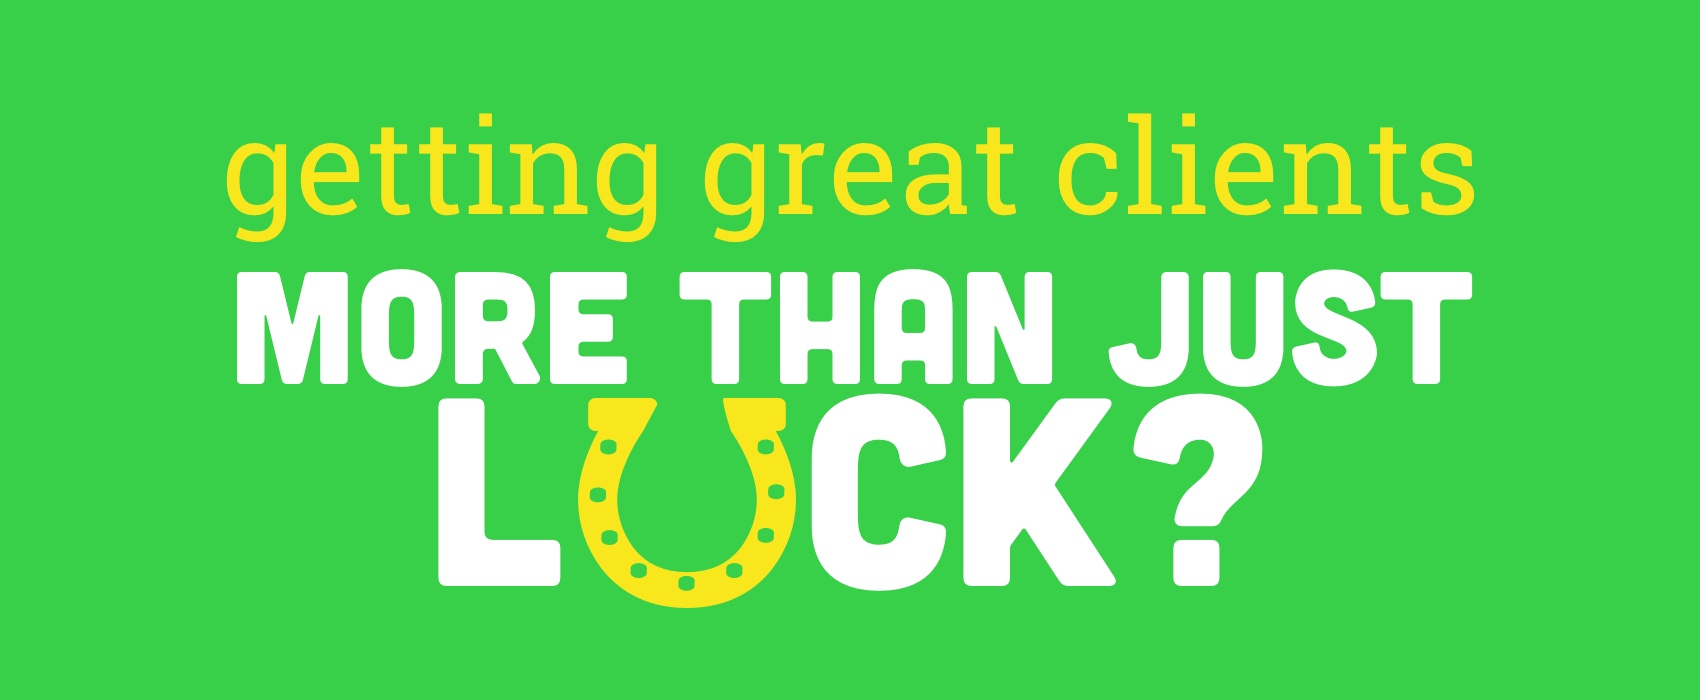 Getting Great Clients: More than Just Luck?